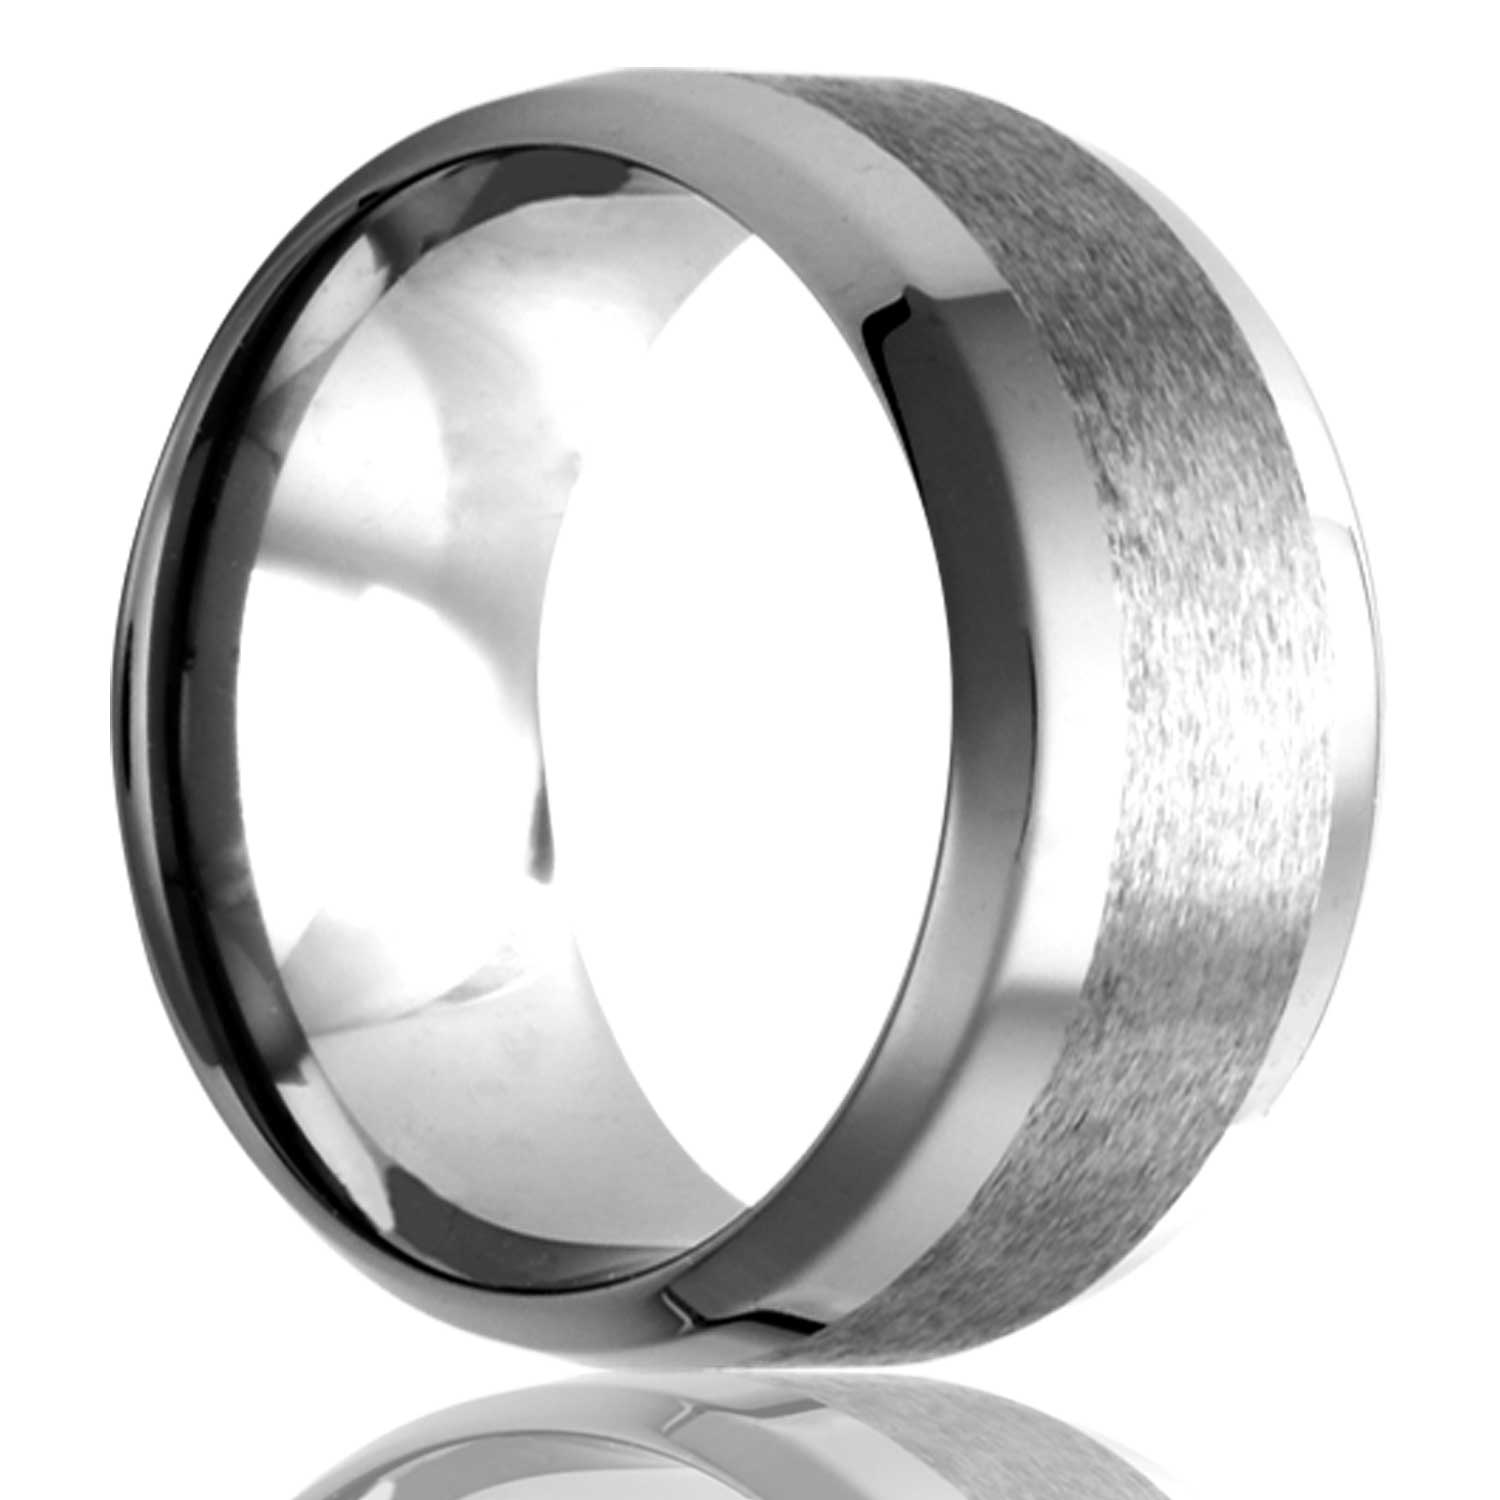 A satin finish tungsten wedding band with beveled polished edges displayed on a neutral white background.